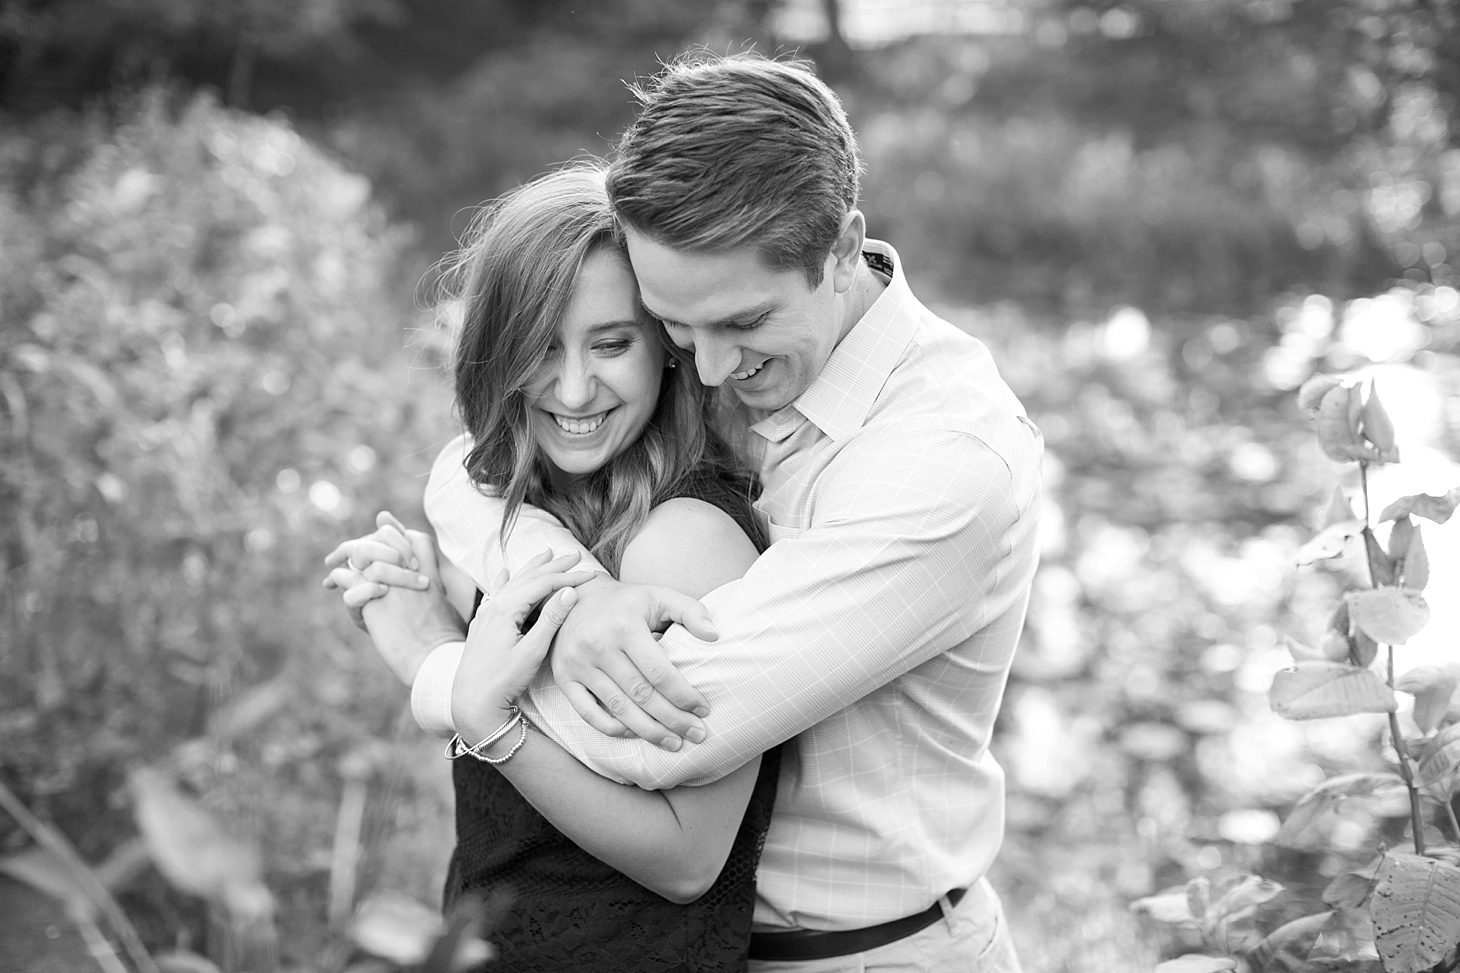 Lily pond & Chicago skyline engagement photos by Christy Tyler Photography_0004